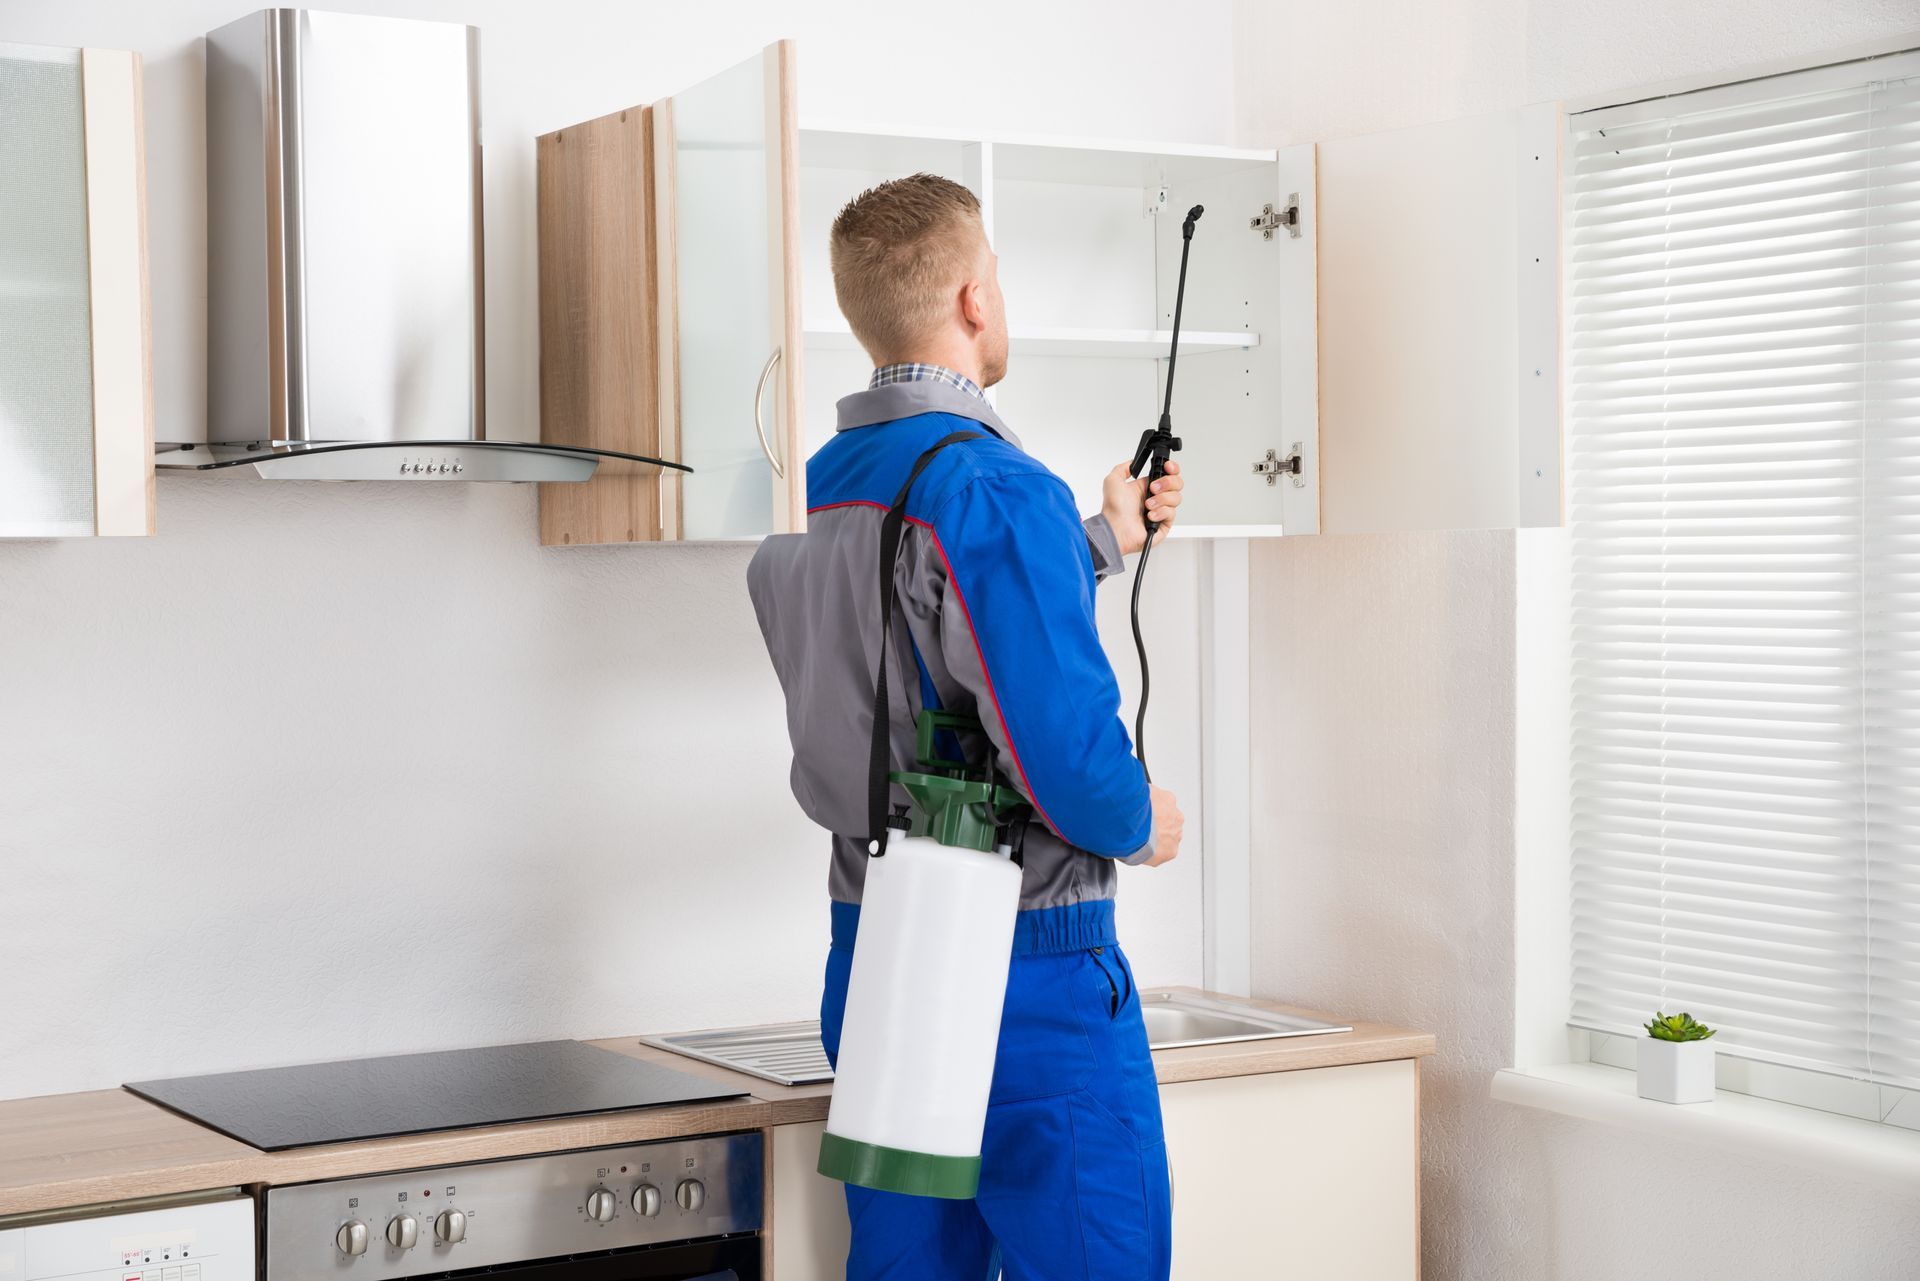 a man spraying a cabinet with a sprayer in a kitchen